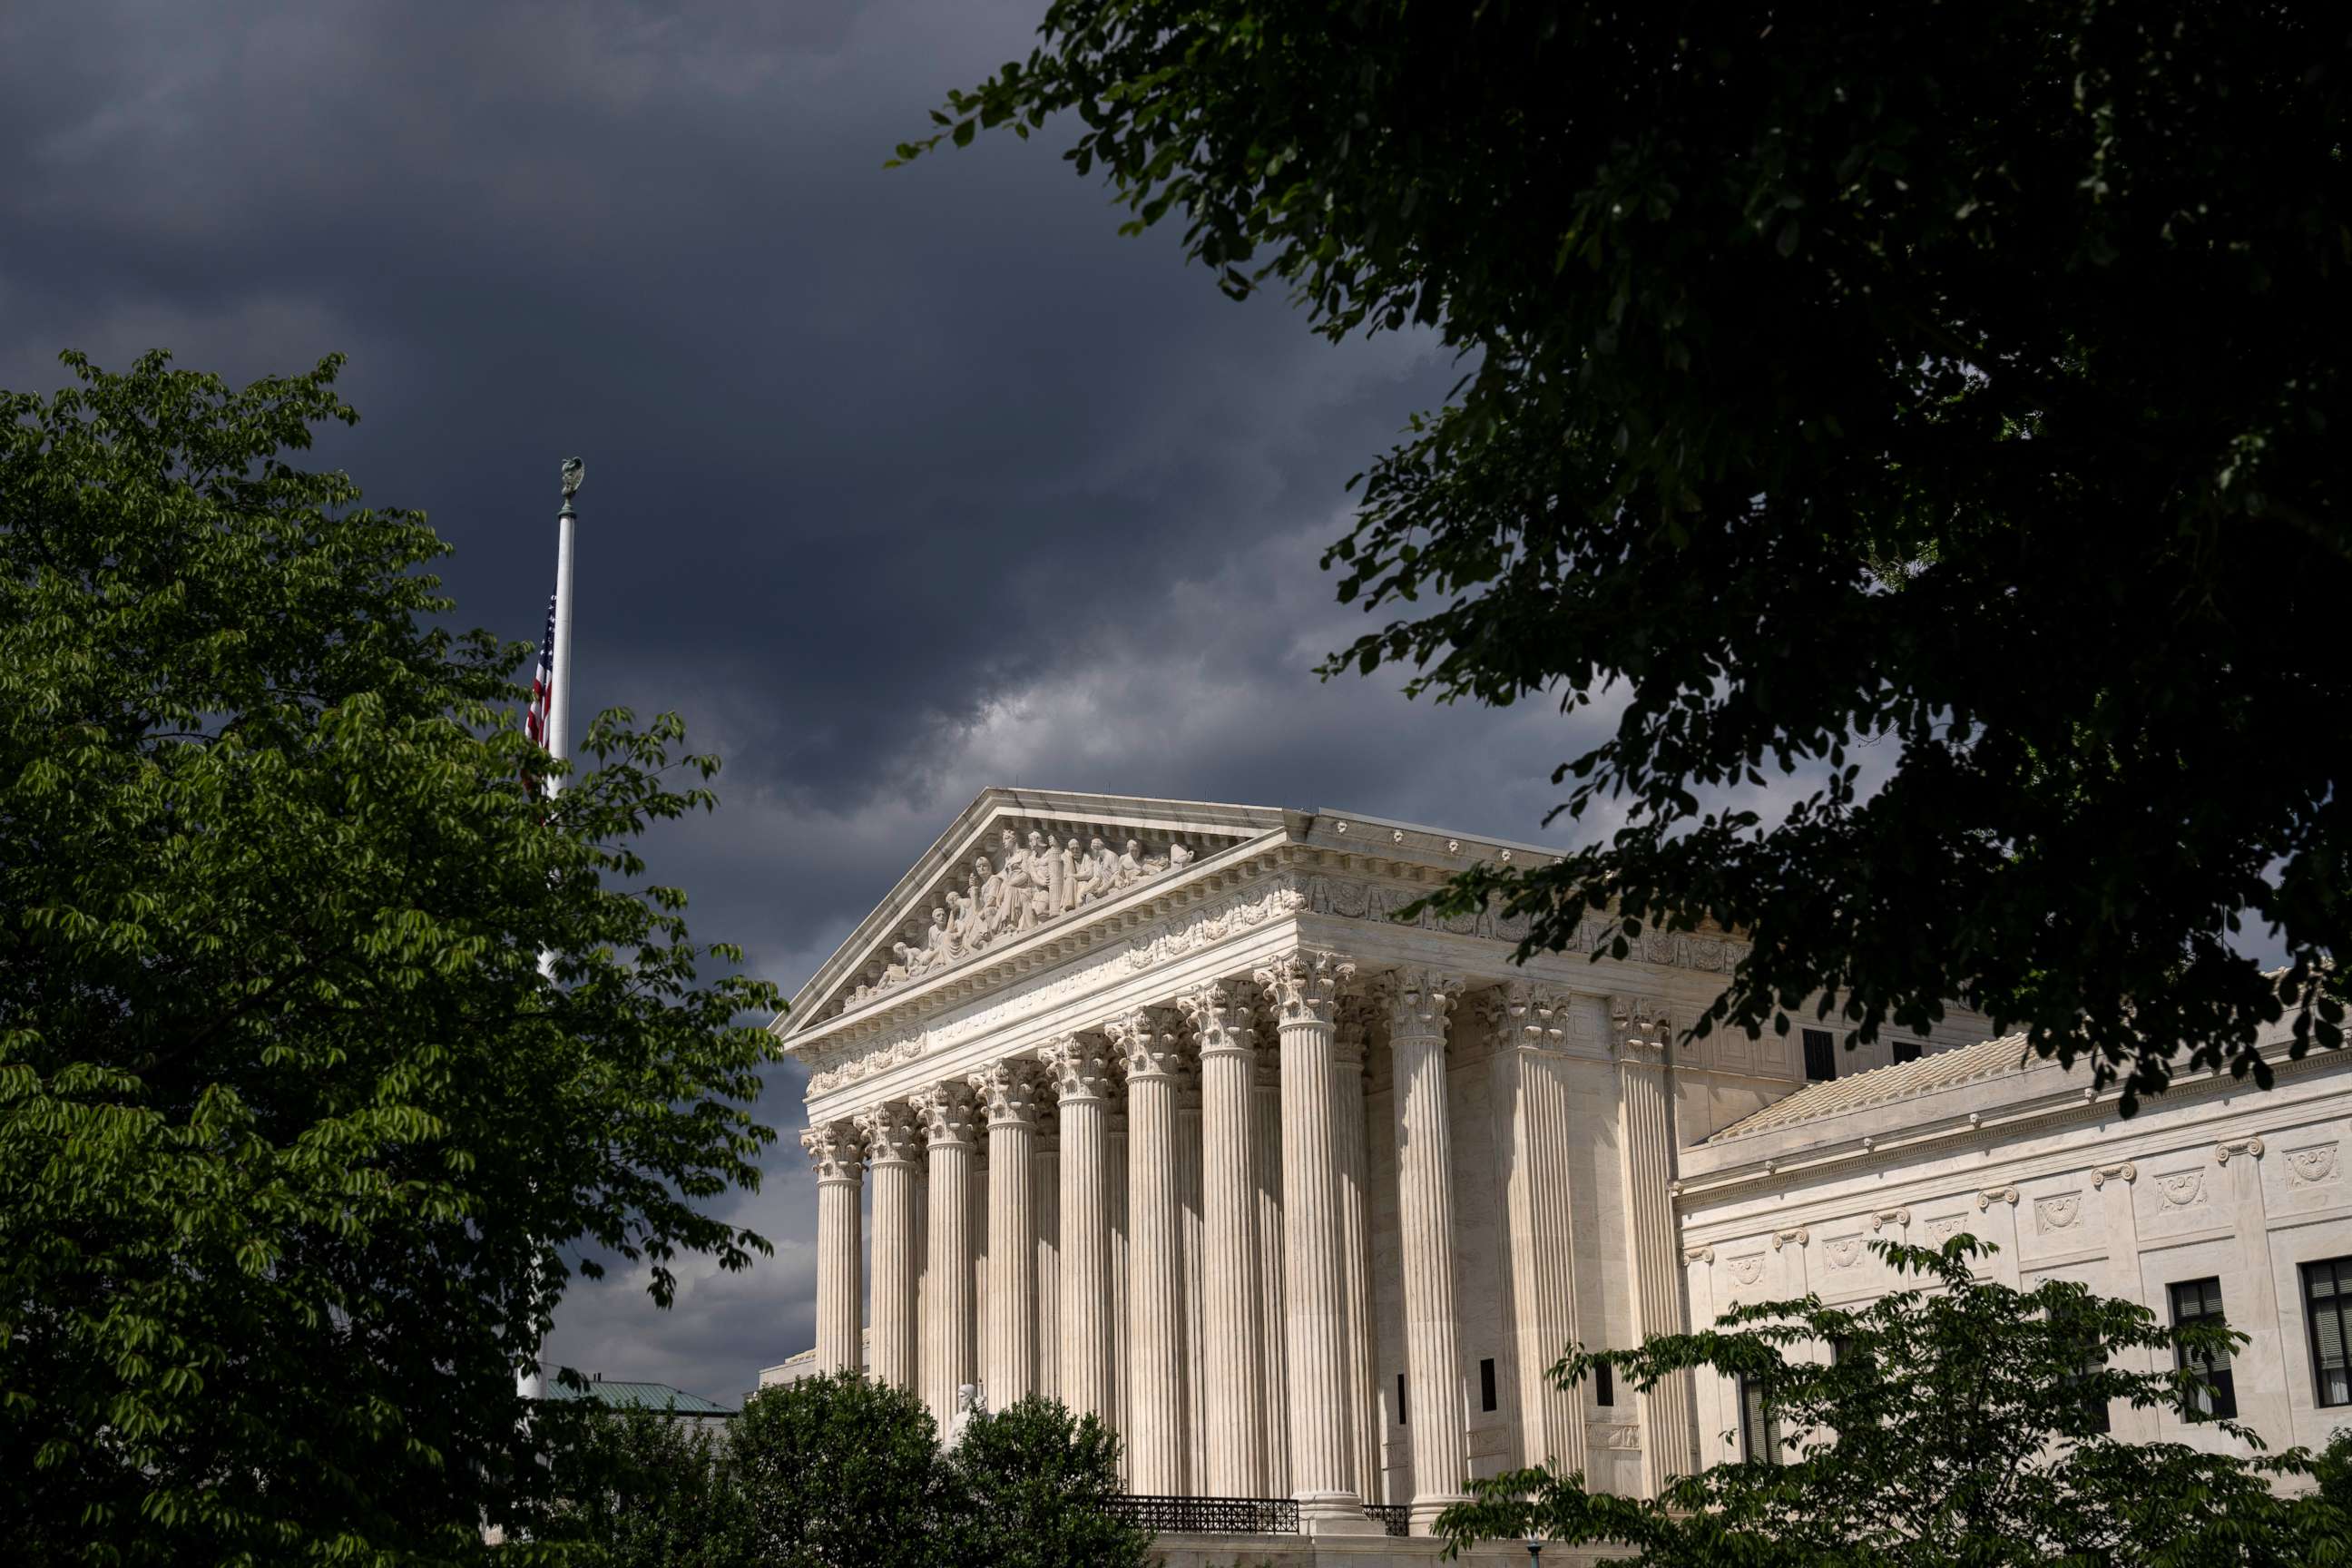 PHOTO: Clouds are seen above The U.S. Supreme Court building, May 17, 2021, in Washington, DC.